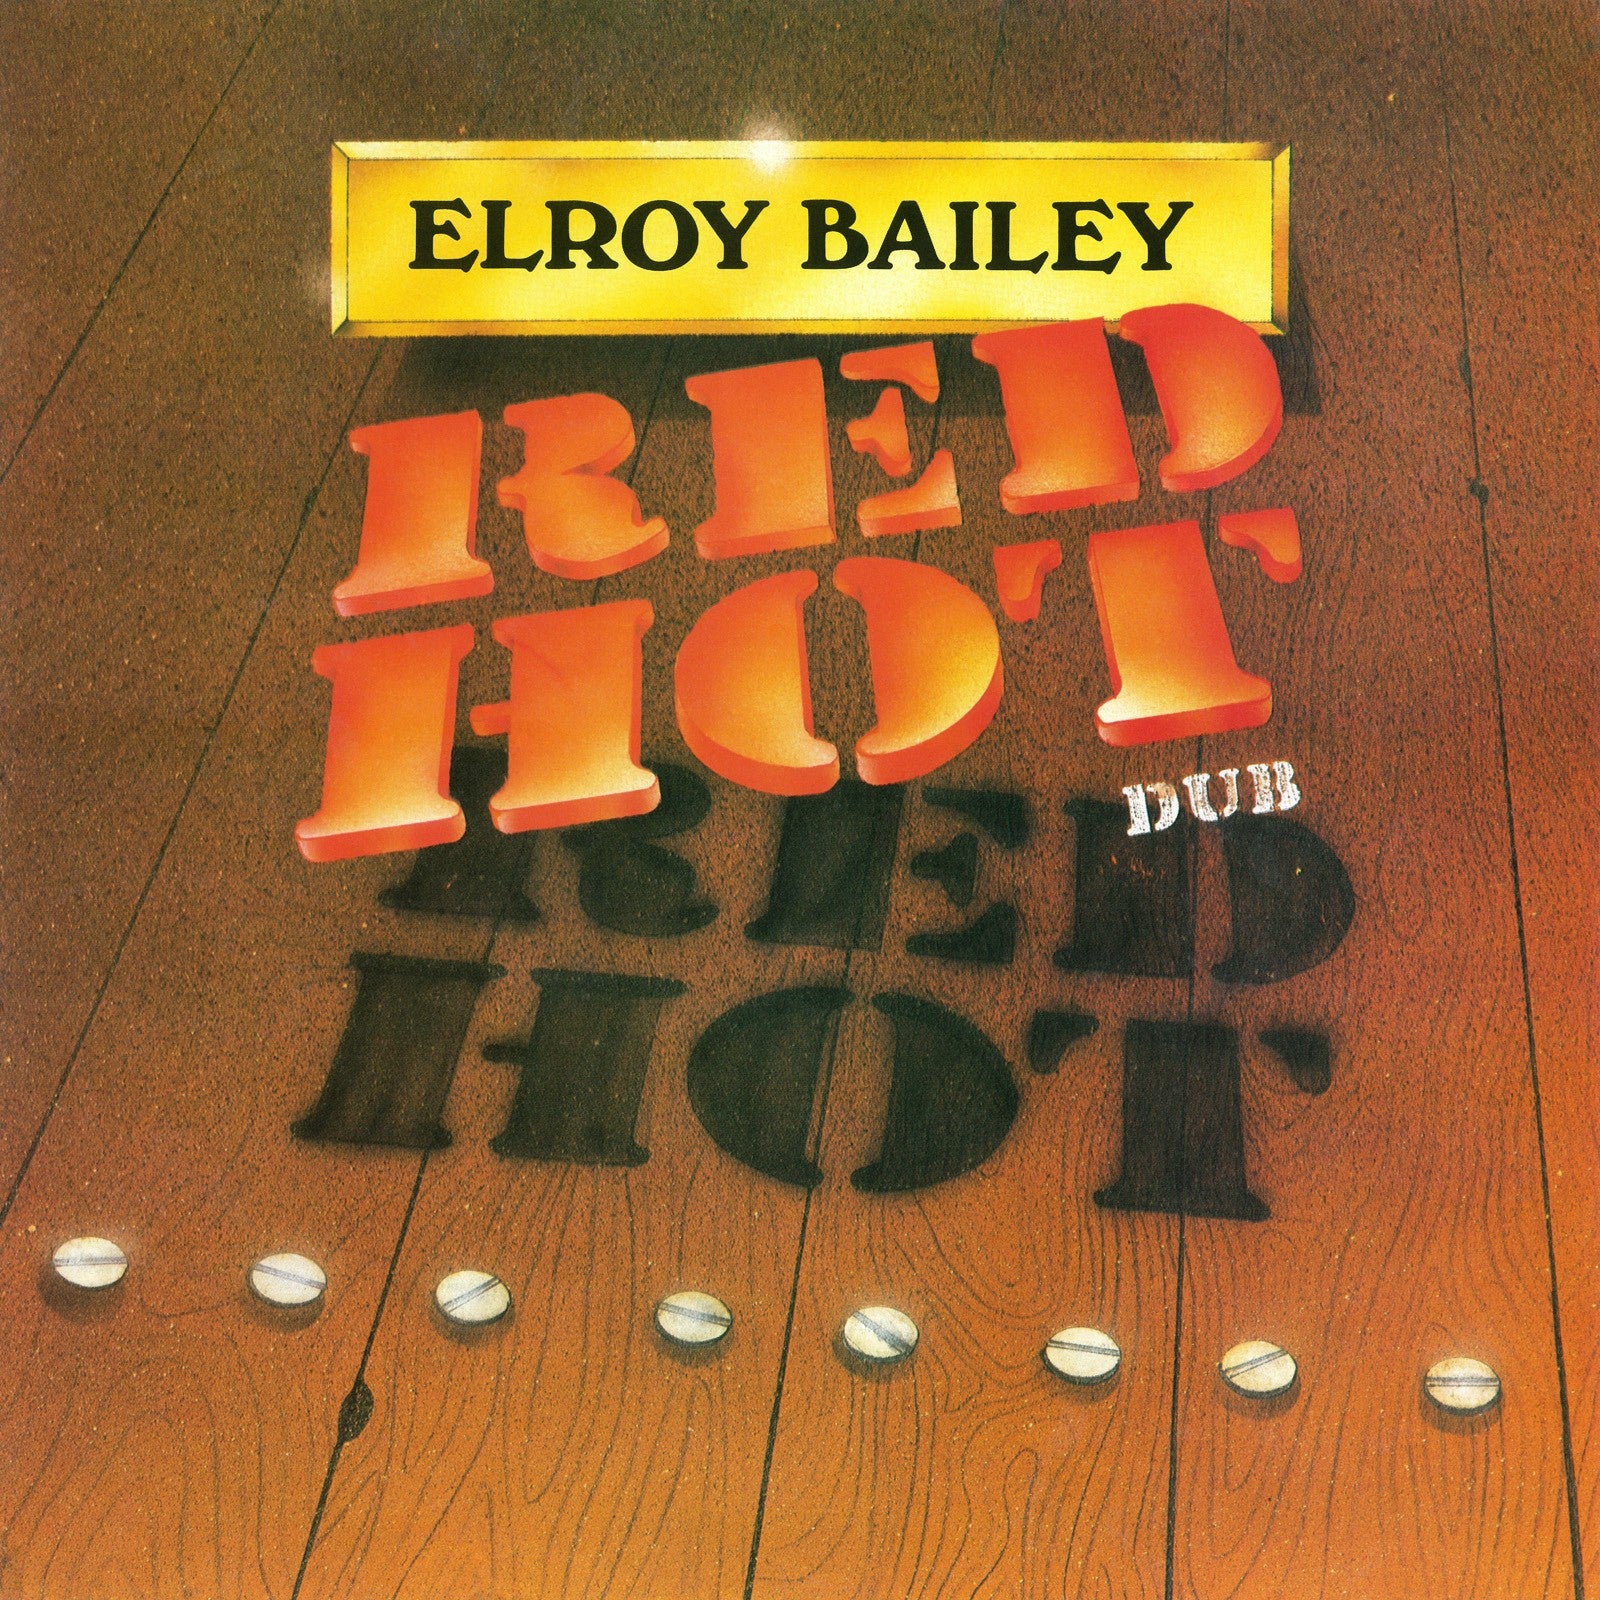 Elroy Bailey - Red Hot Dub - CD Album - Secret Records Limited